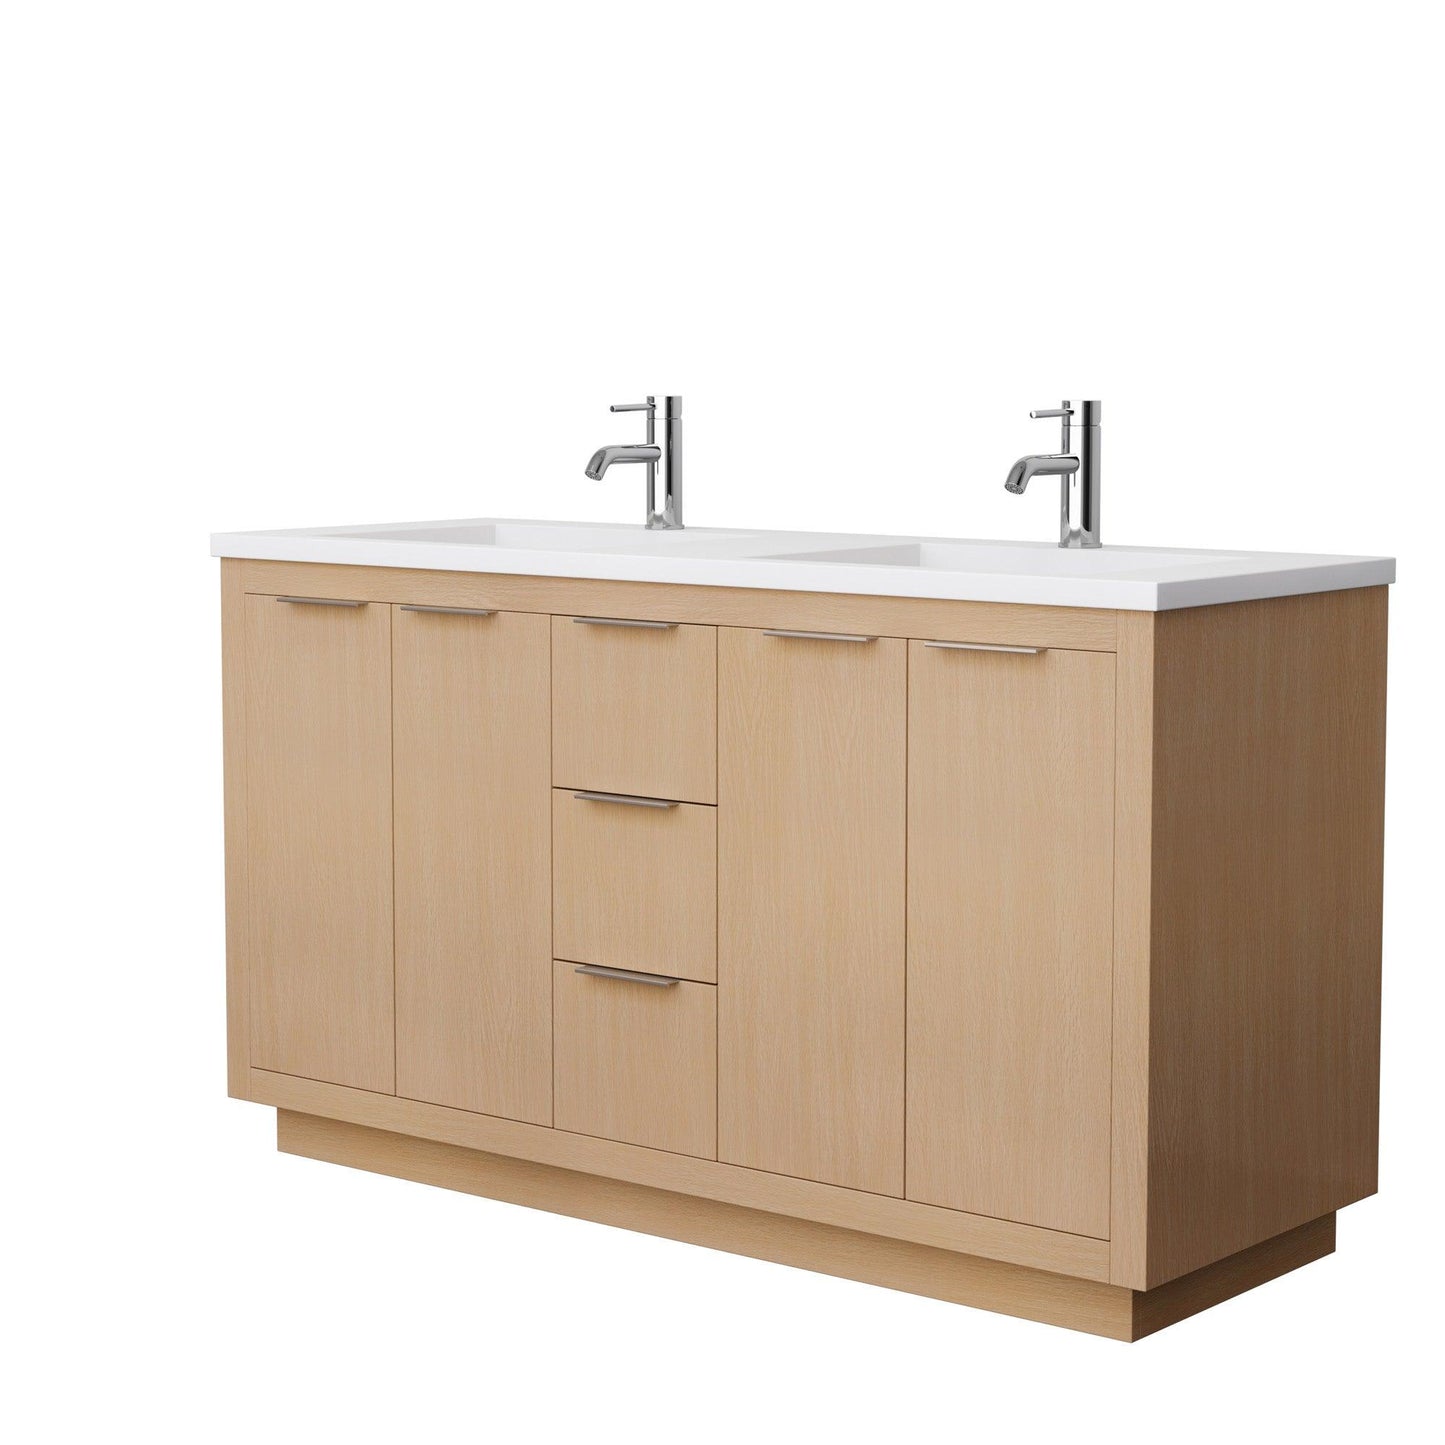 Wyndham Collection Maroni Inch Double Bathroom Vanity in Light Straw, 1.25 Inch Thick Matte White Solid Surface Countertop, Integrated Sinks - Sea & Stone Bath